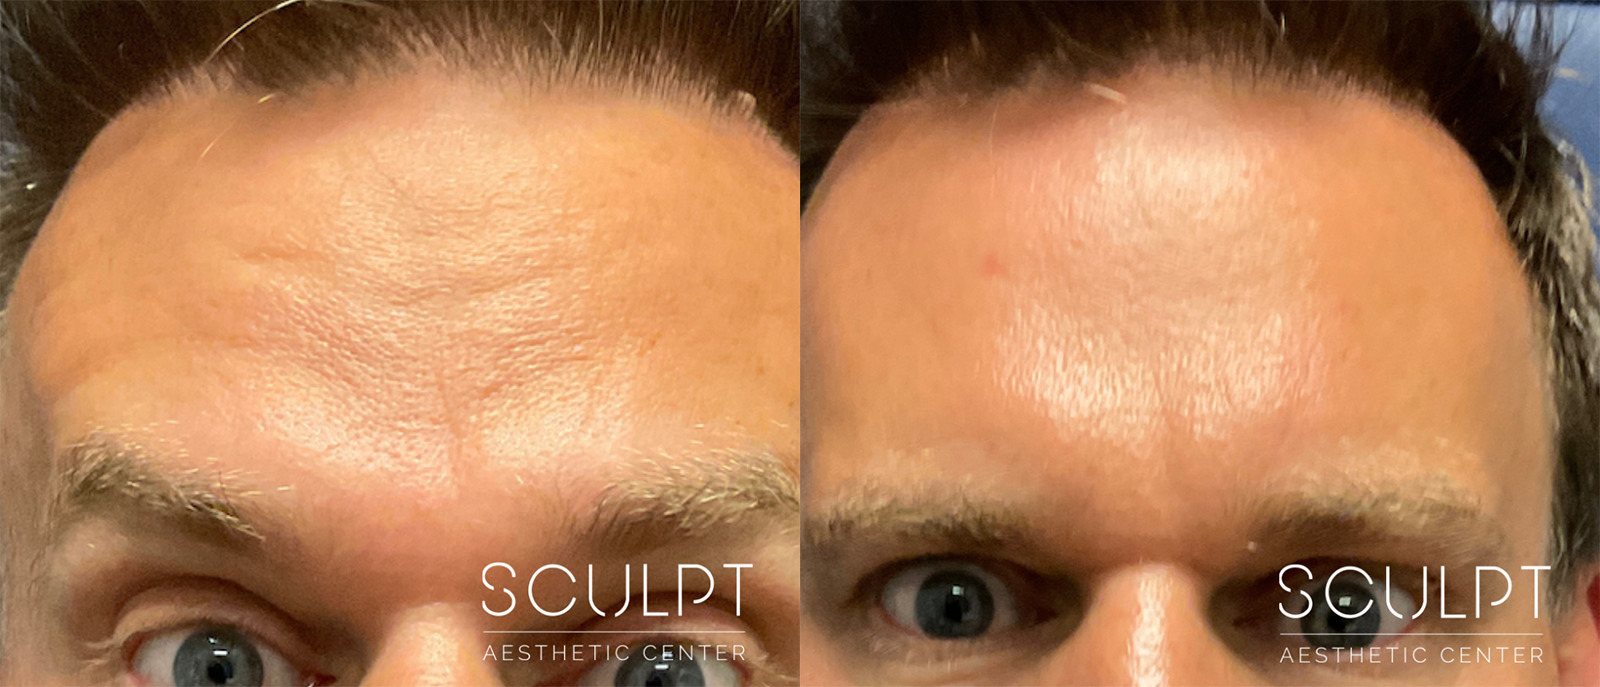 Botox/Dysport Before and After Photo by Sculpt Aesthetic Center in Frisco, TX